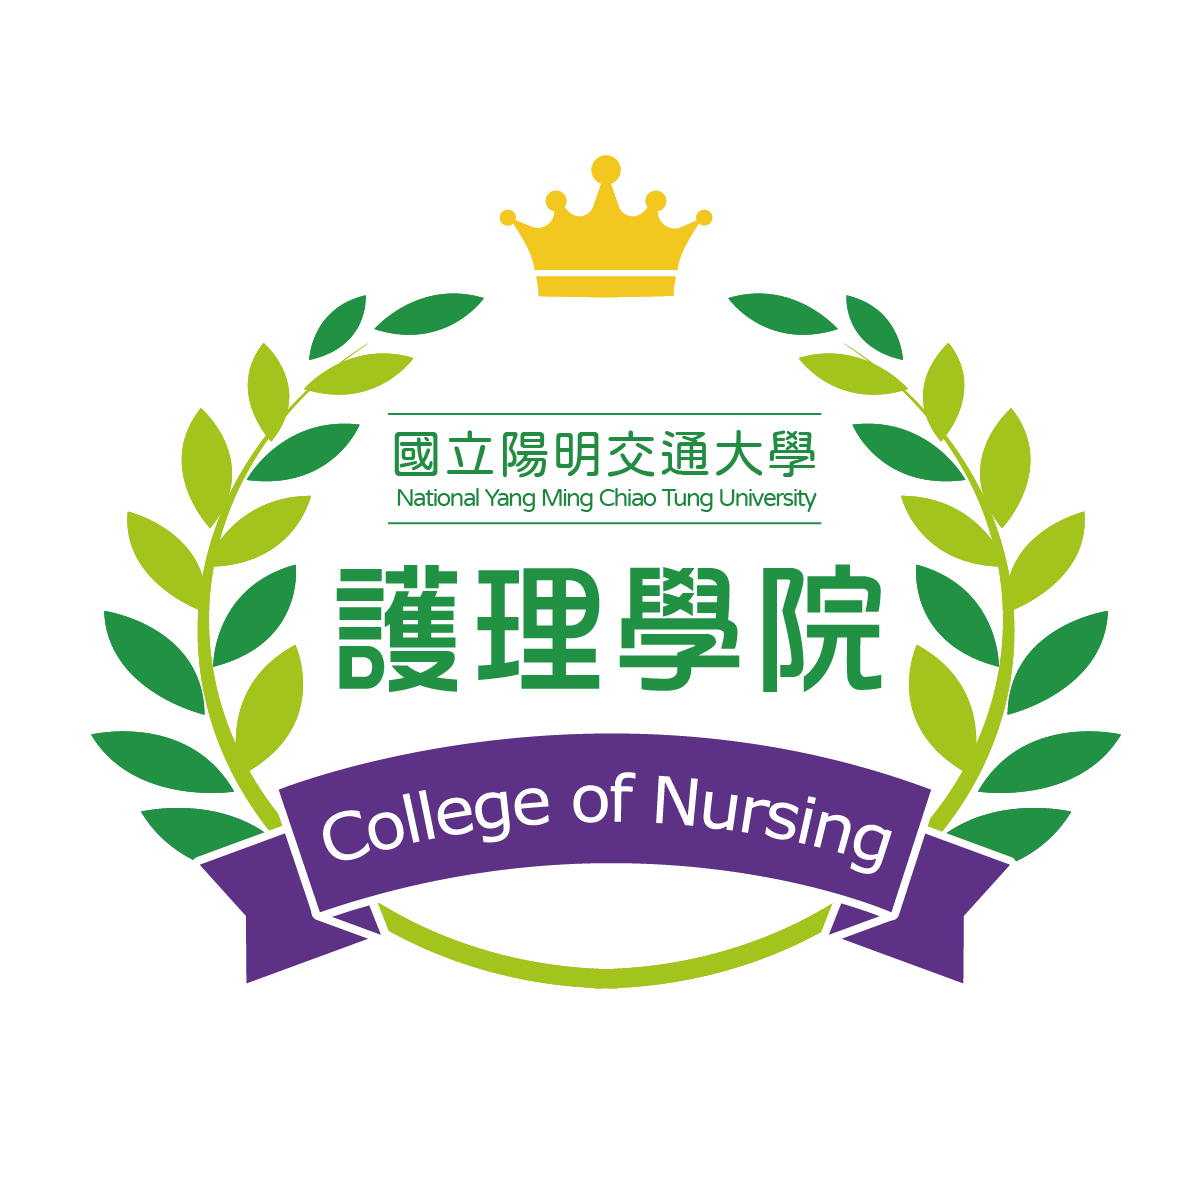 Director Recruitment Announcement Institute of Community Health Care, National Yang Ming Chiao Tung University